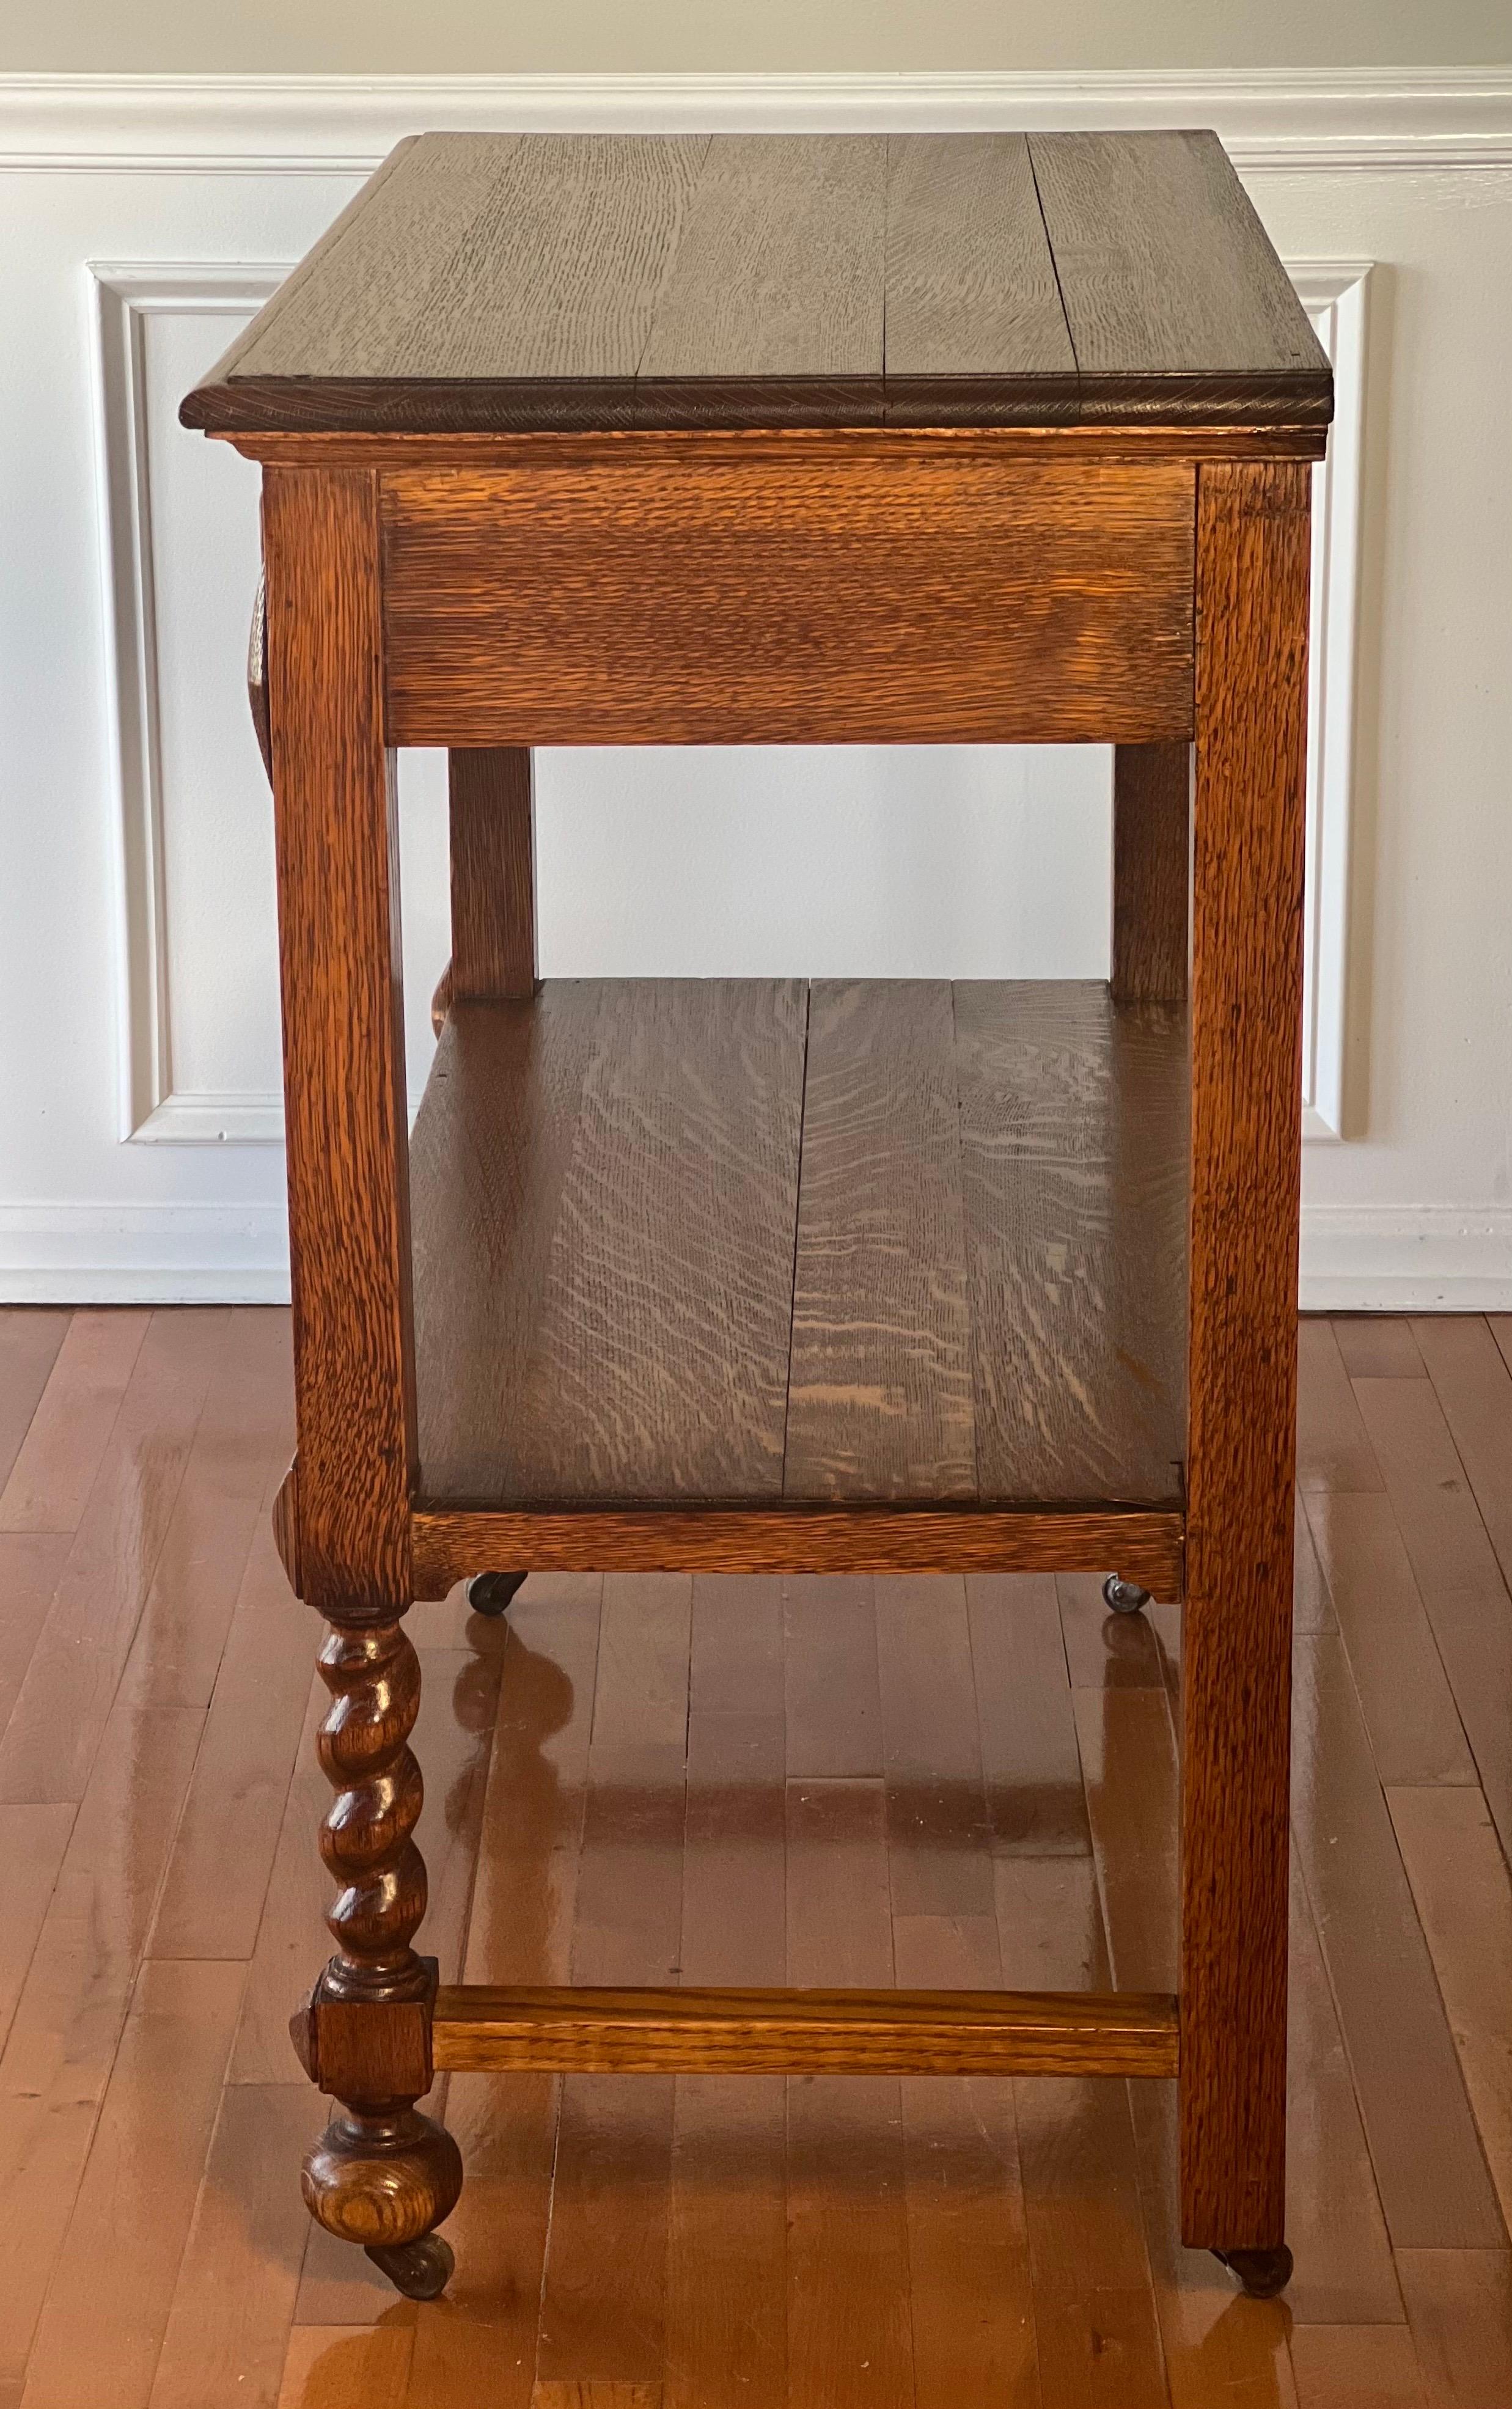 Early 20th Century English Quarter Sawn Oak Two-Tier Server on Casters For Sale 2